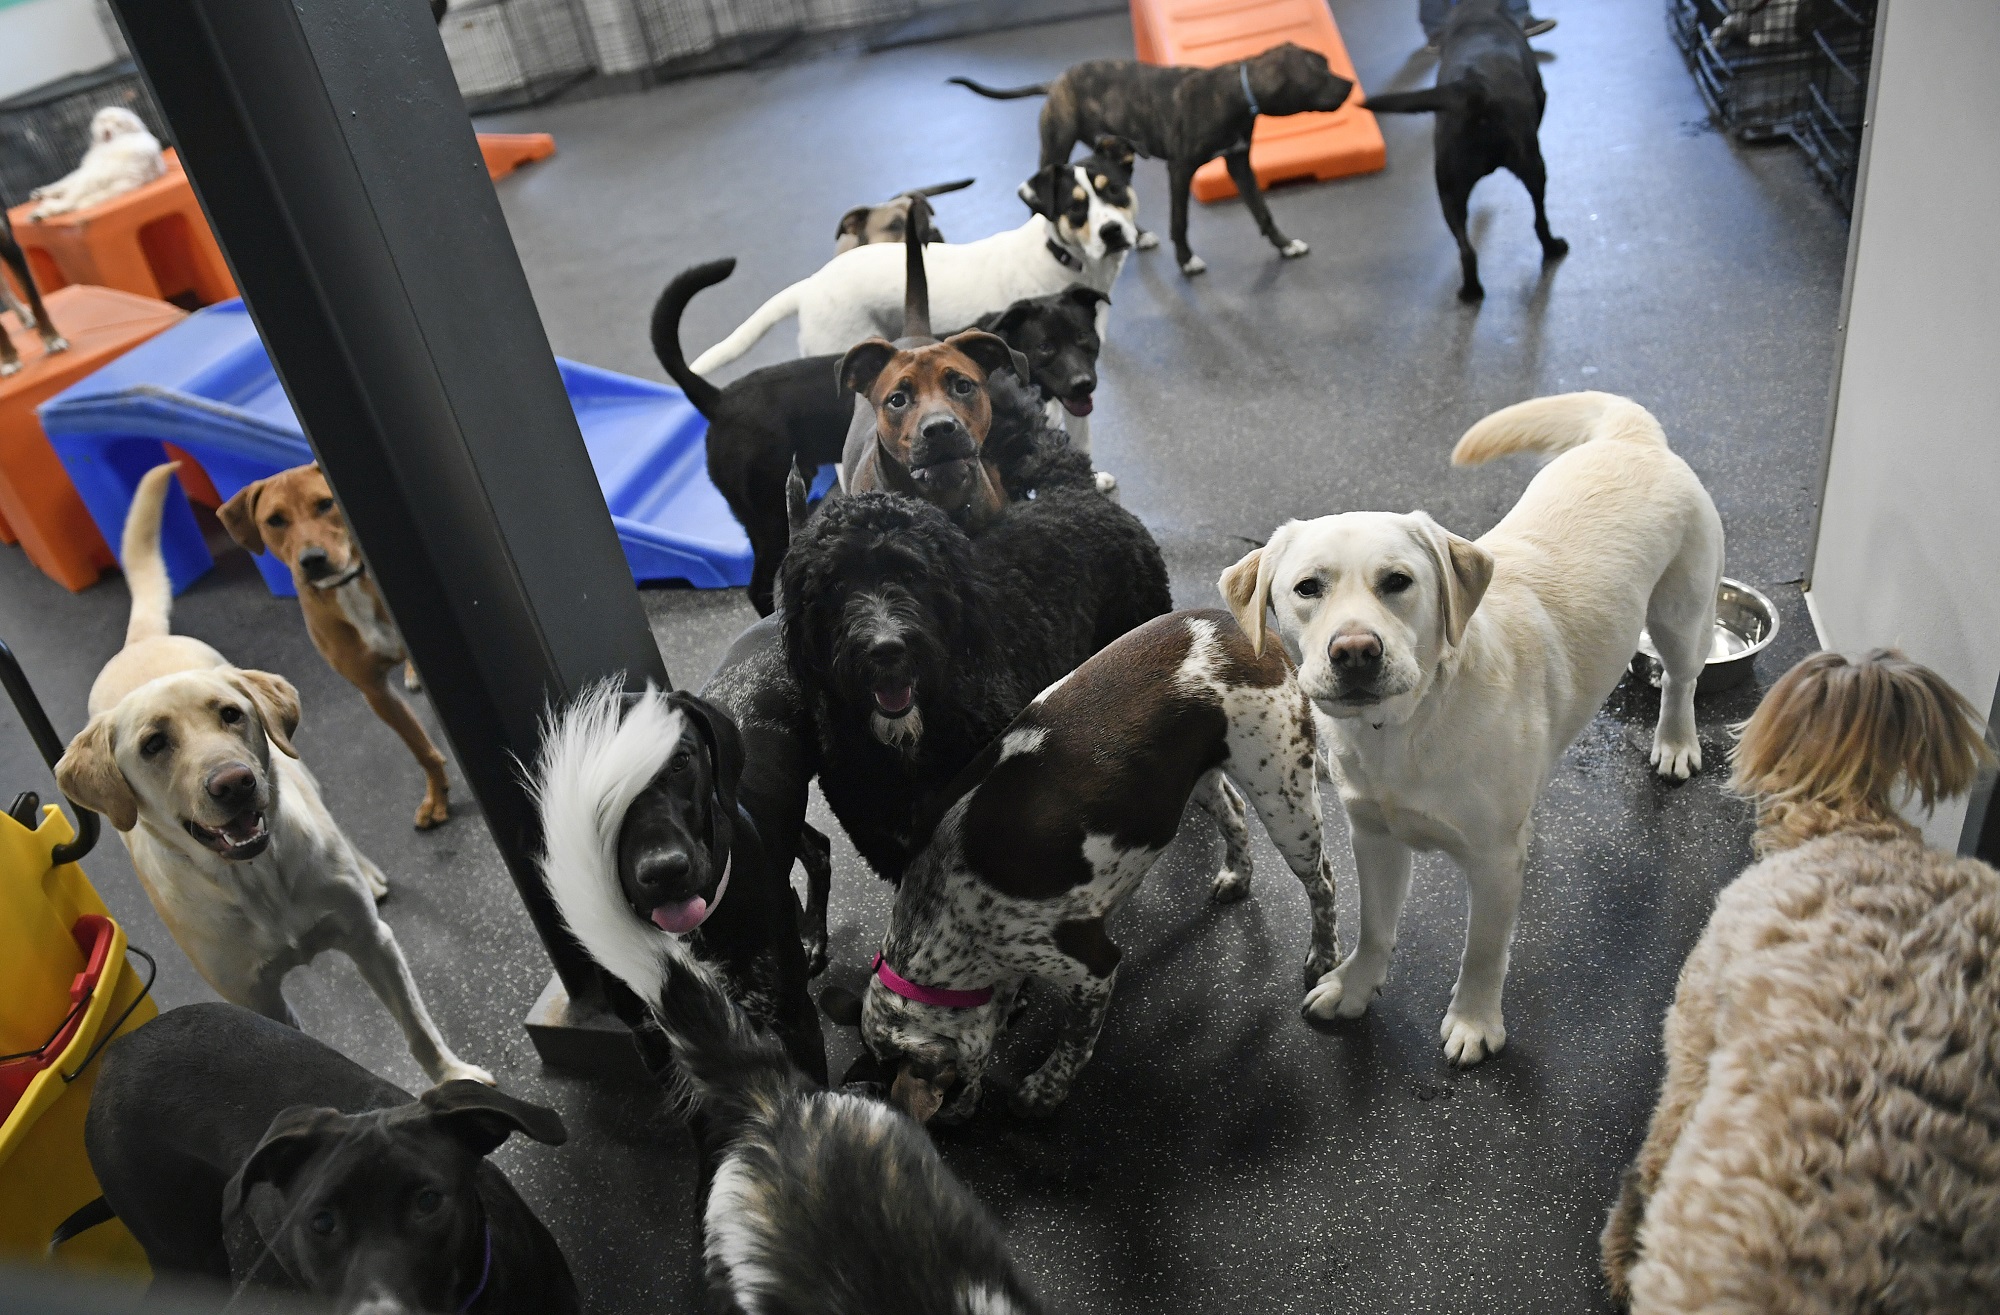 Fourteen dogs stand together inside at Dogtopia location.